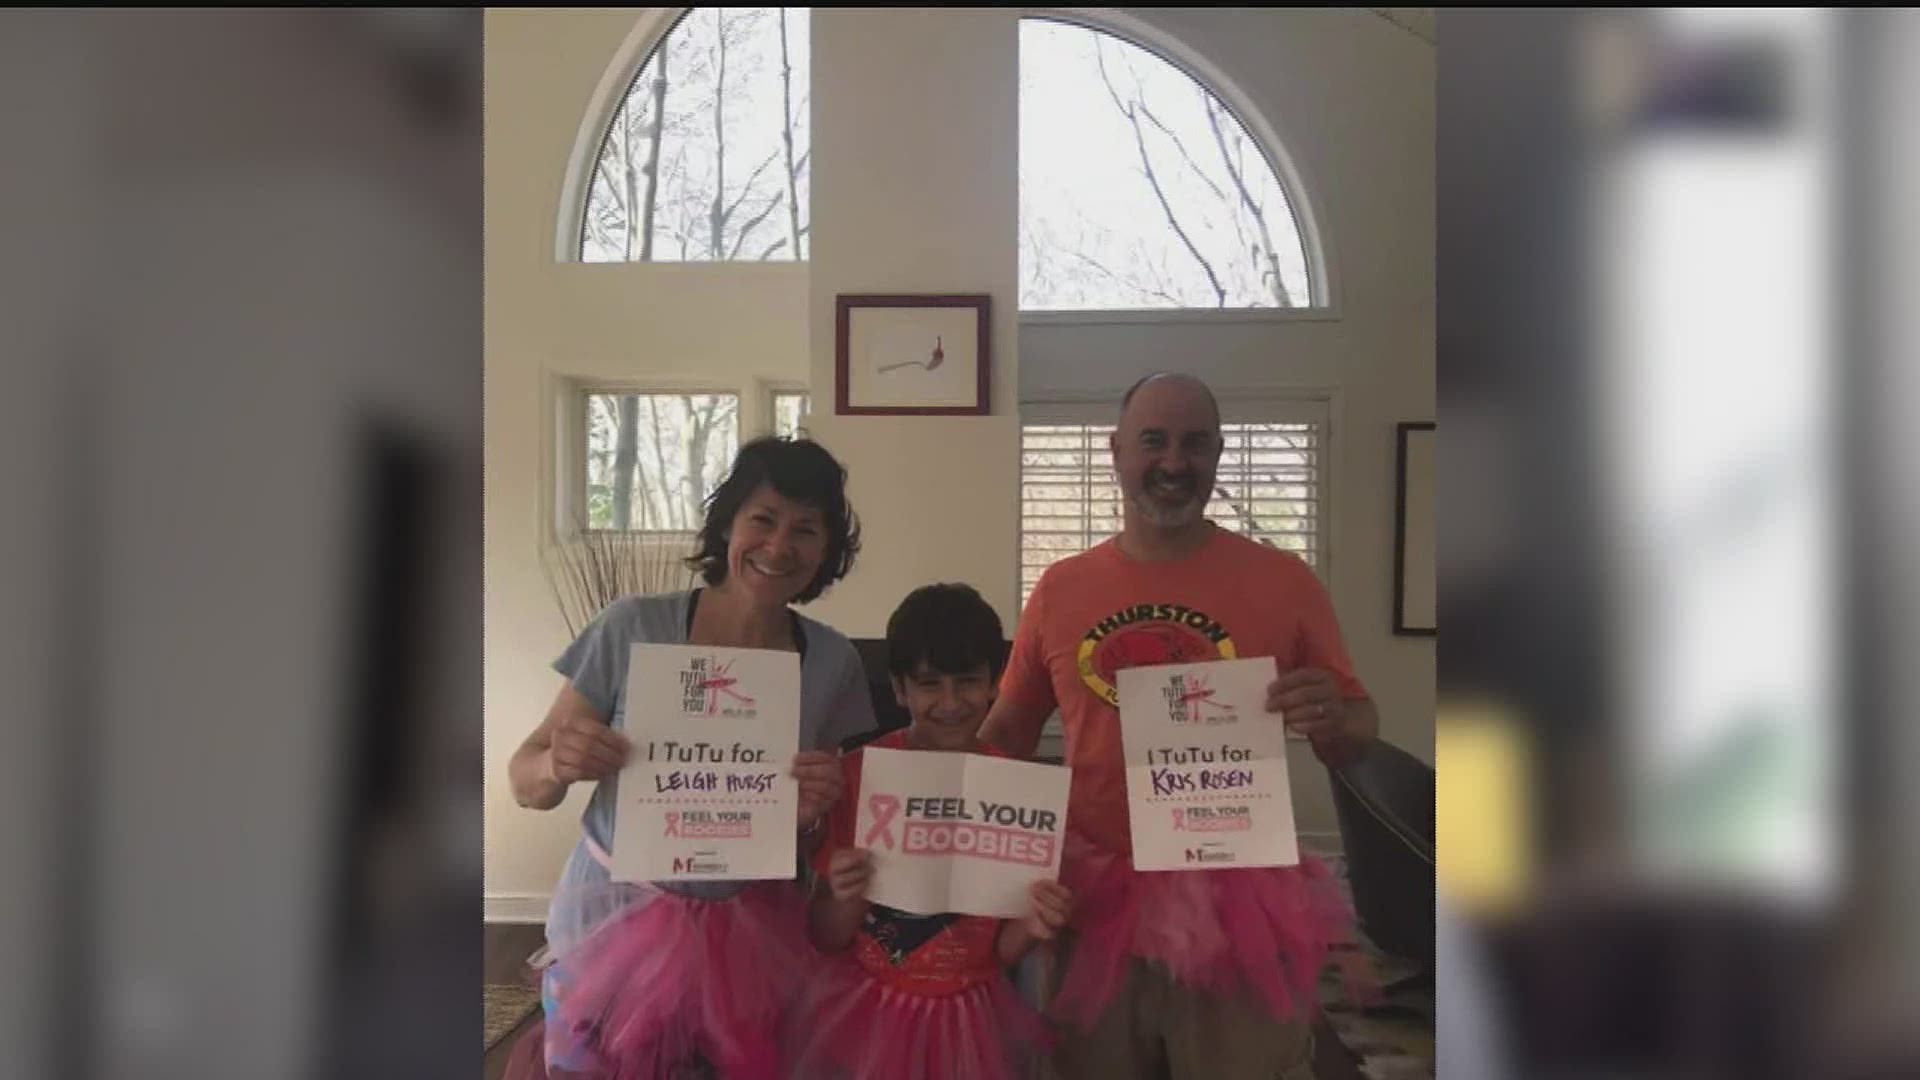 Thousands across the country honor breast cancer survivors